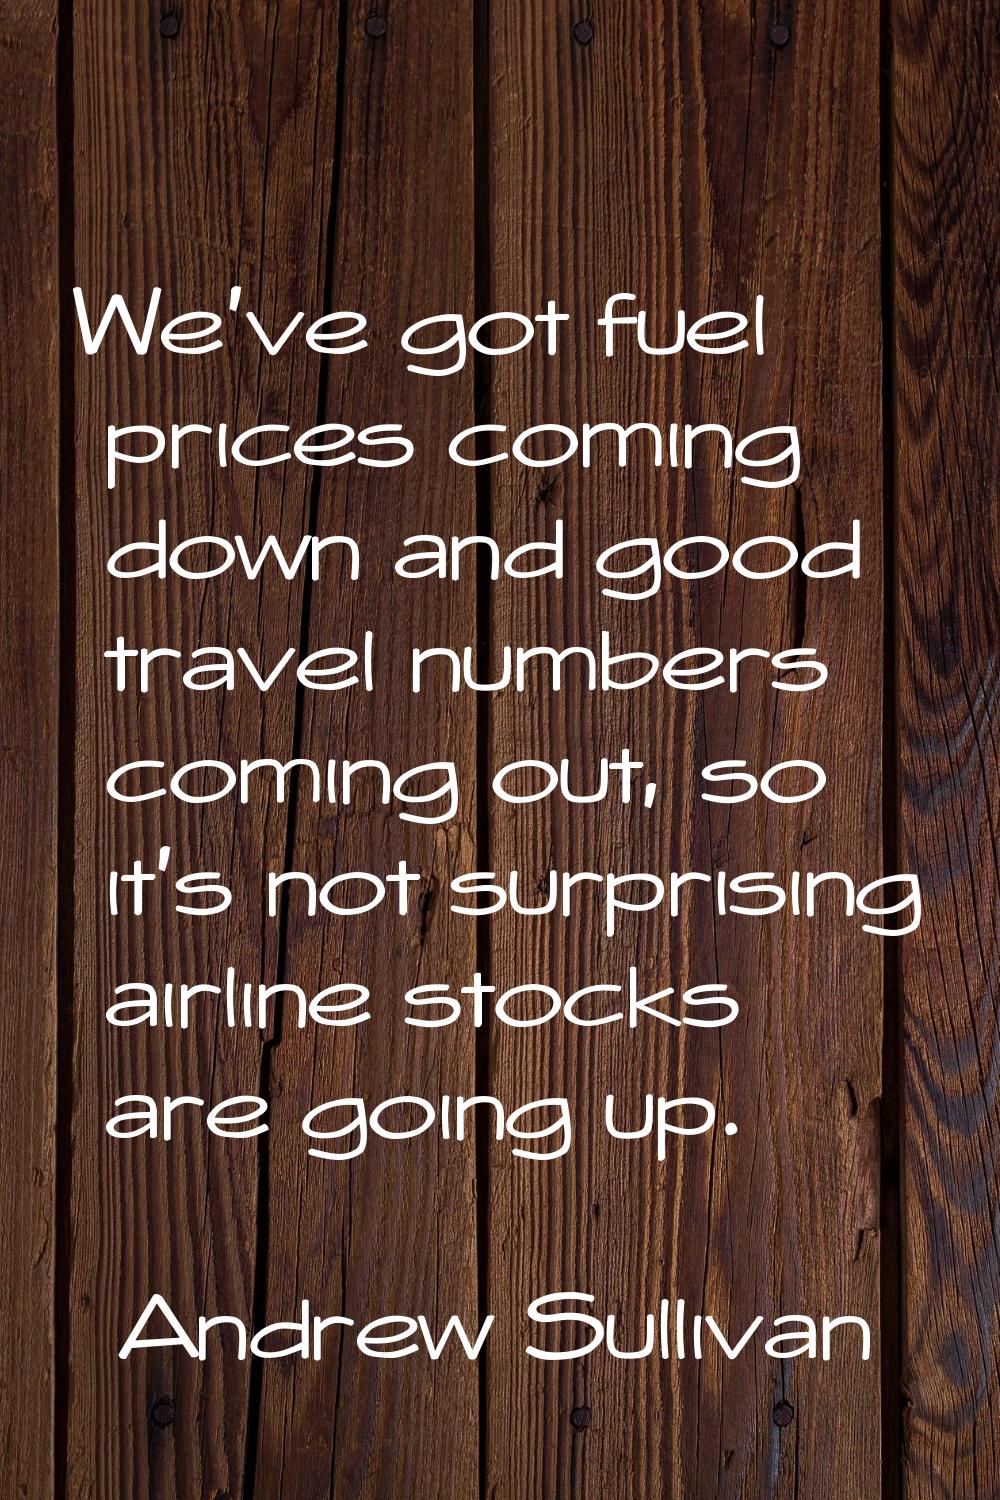 We've got fuel prices coming down and good travel numbers coming out, so it's not surprising airlin